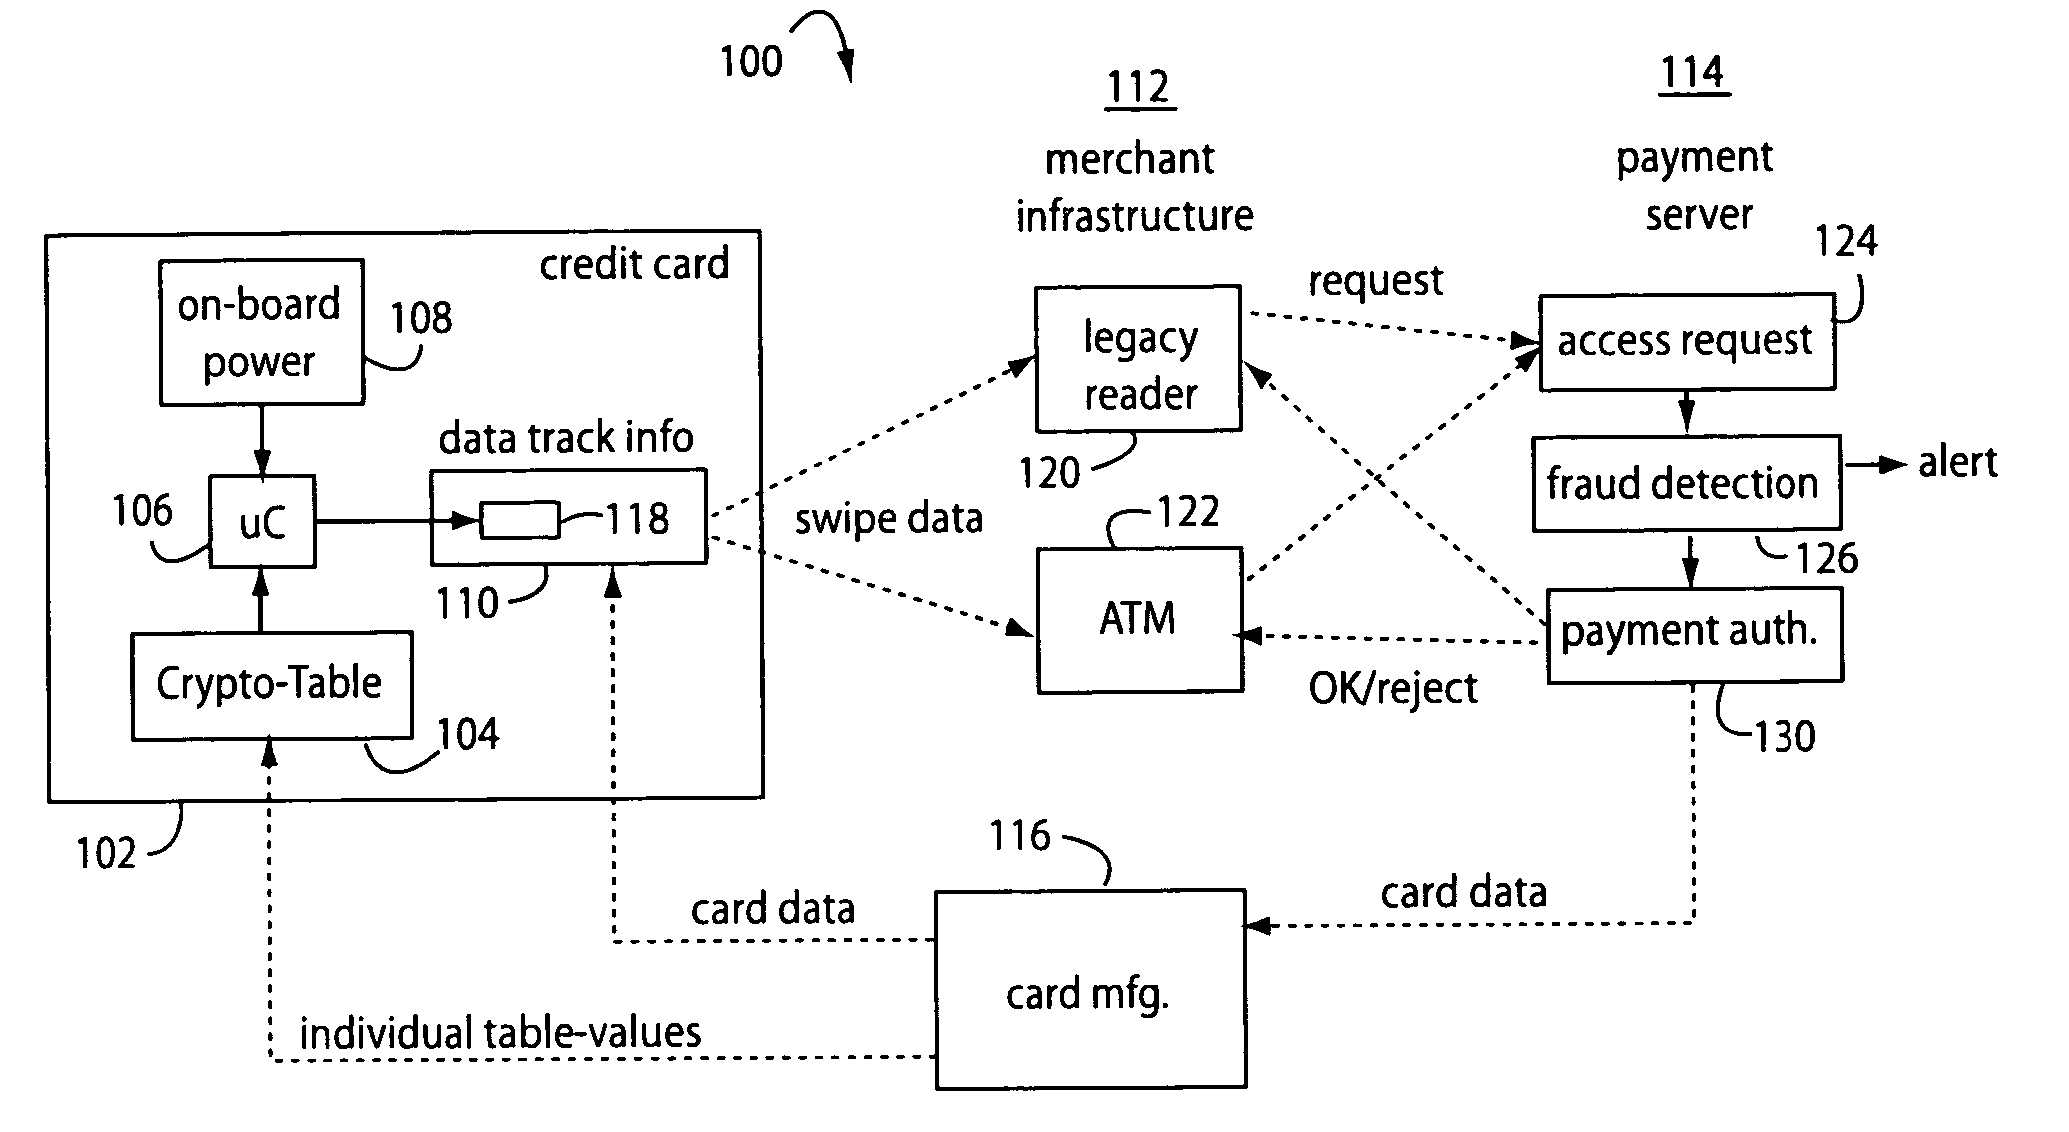 Automated payment card fraud detection and location